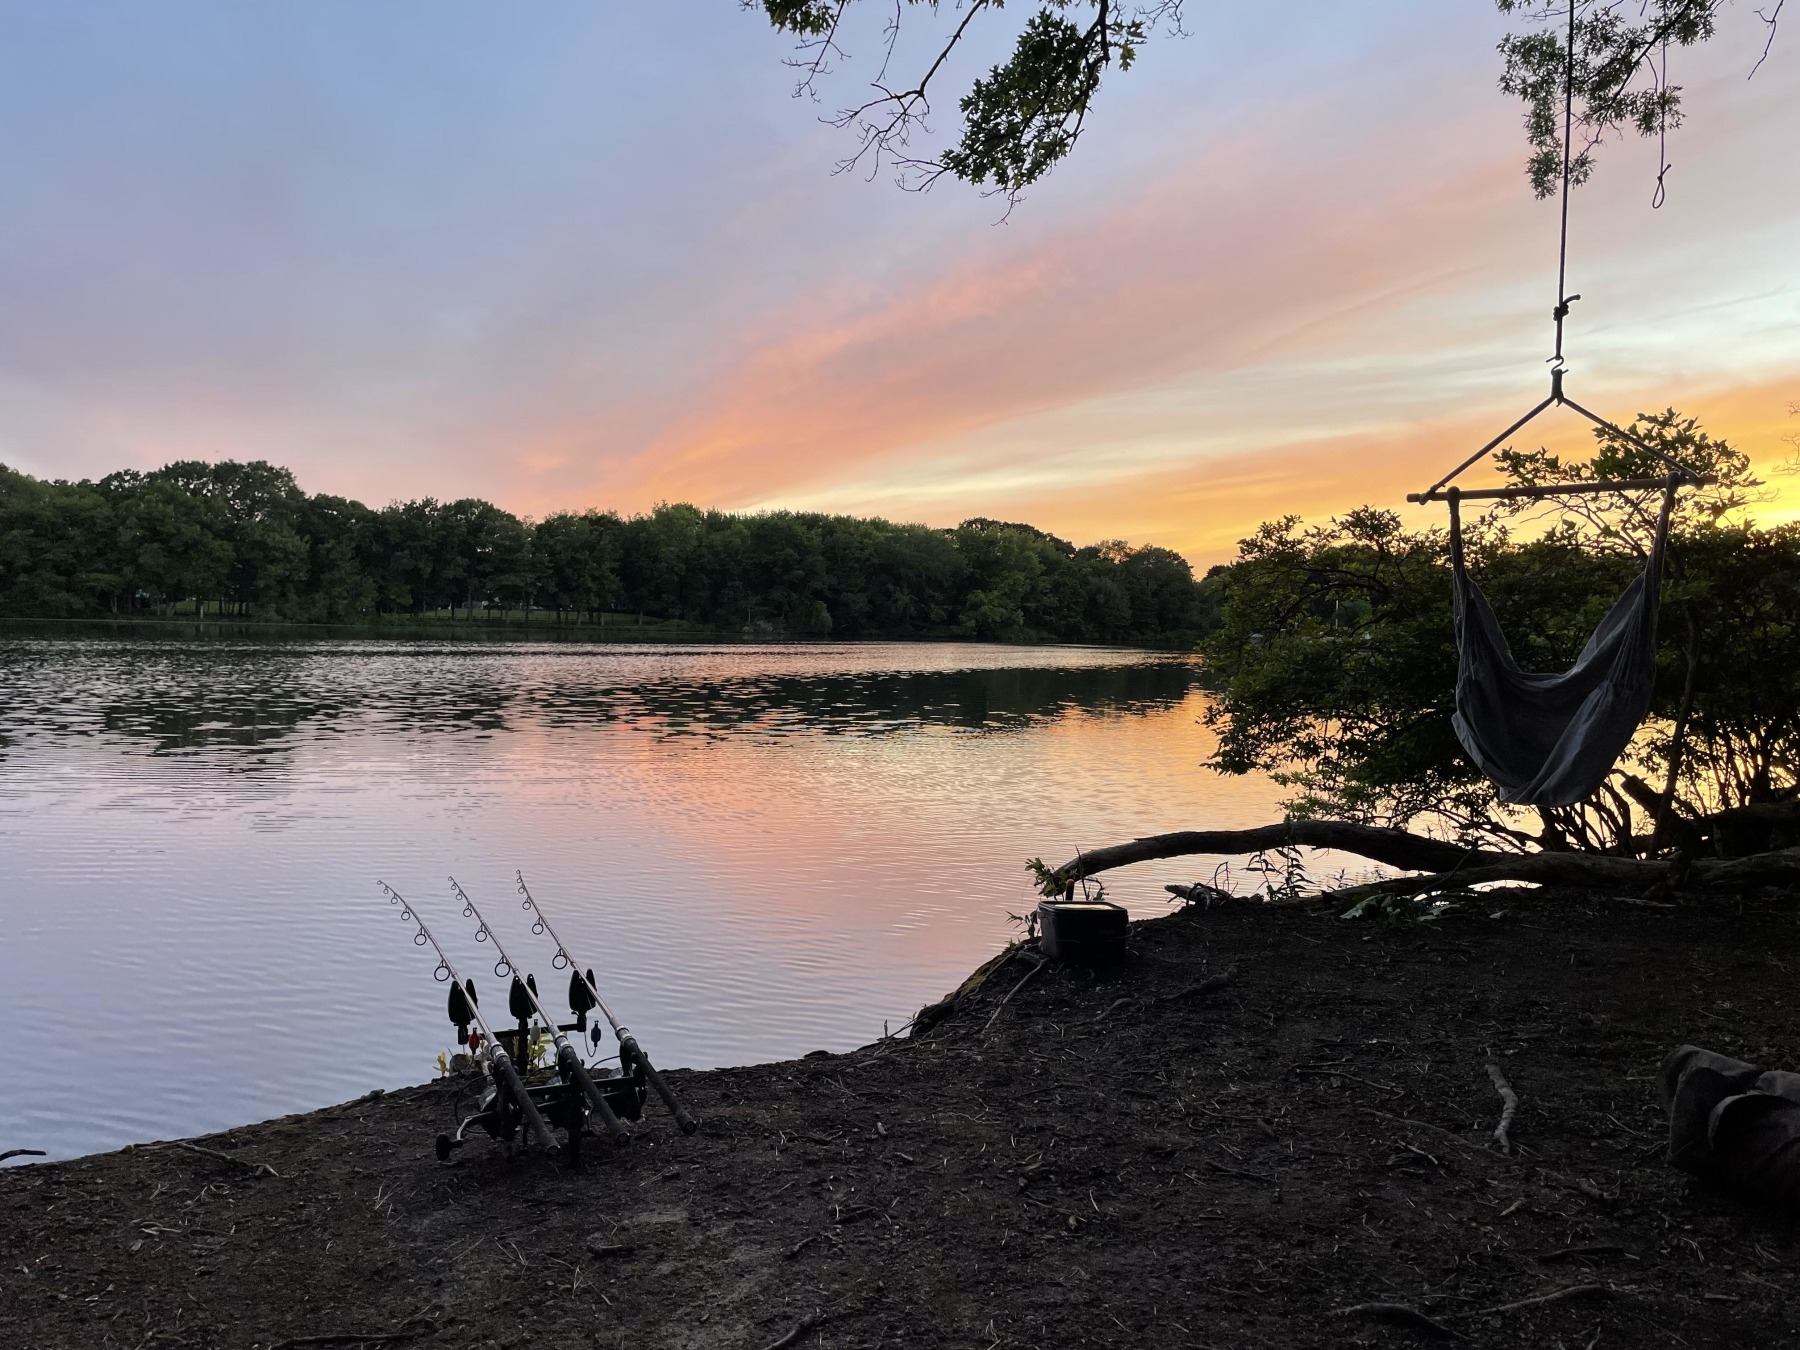 Beautiful – and not another angler in sight!